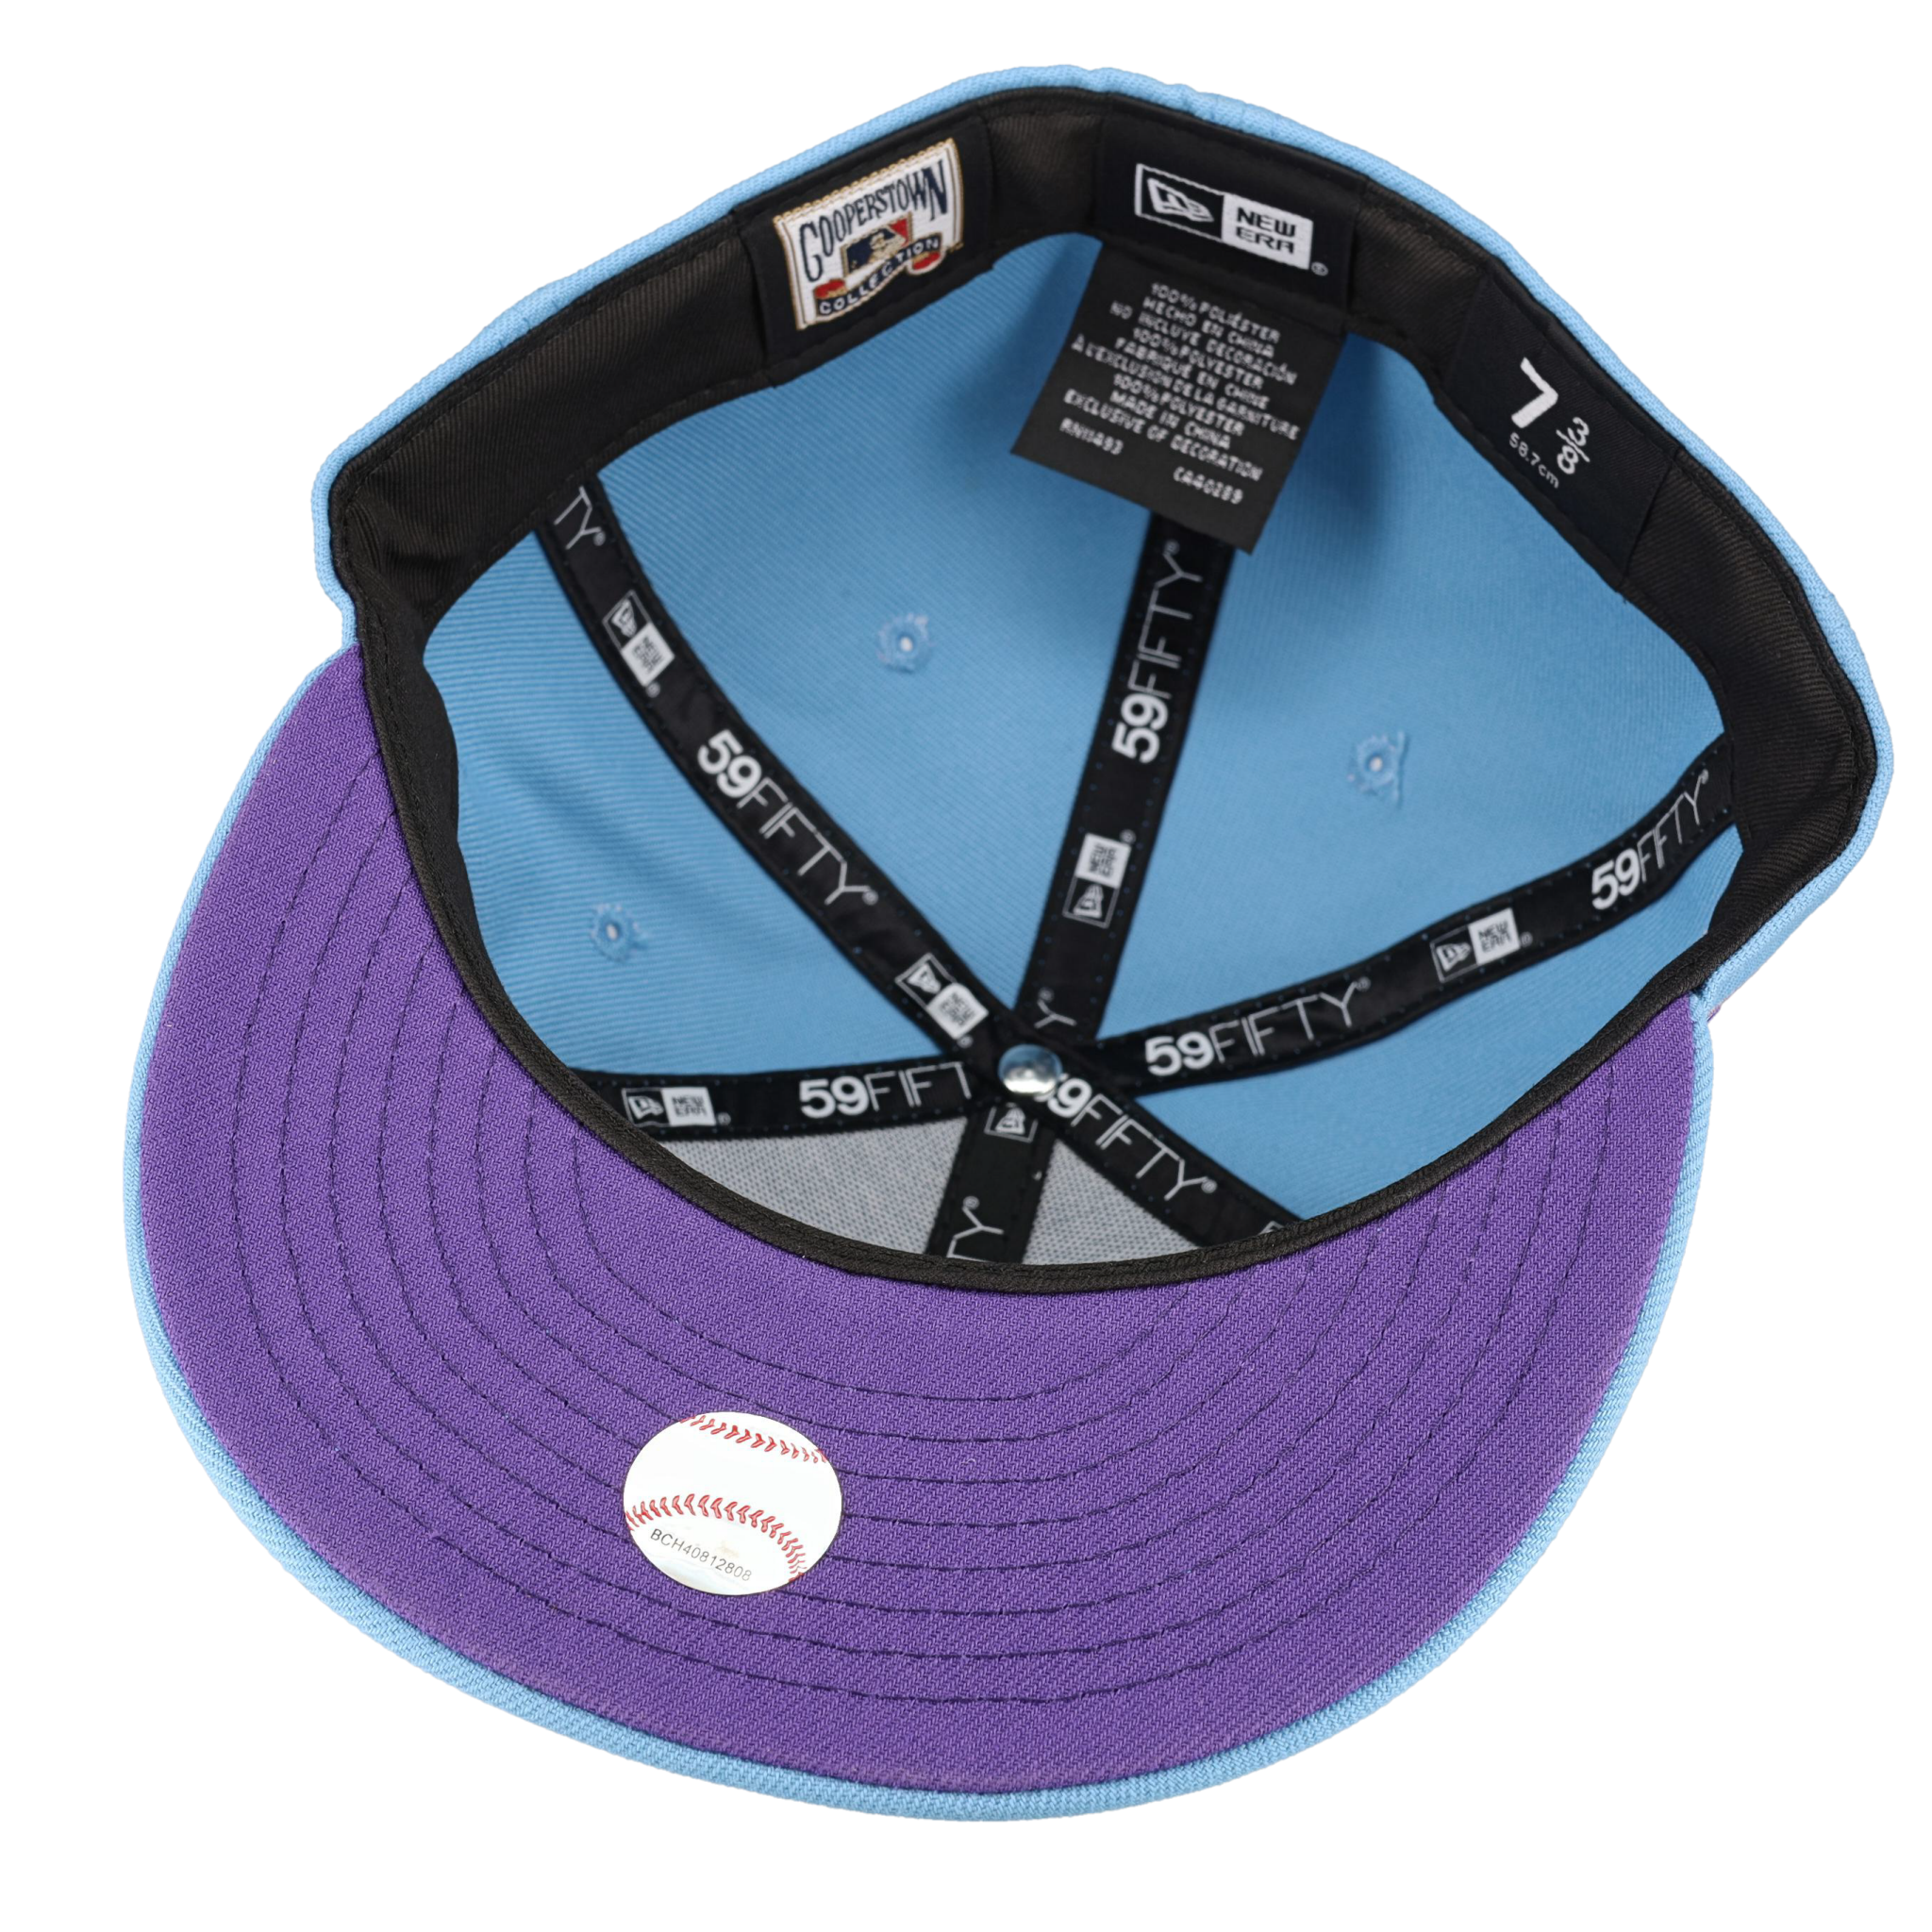 New Era Atlanta Braves World Series 1995 Purple Edition 59Fifty Fitted Cap, EXCLUSIVE HATS, CAPS